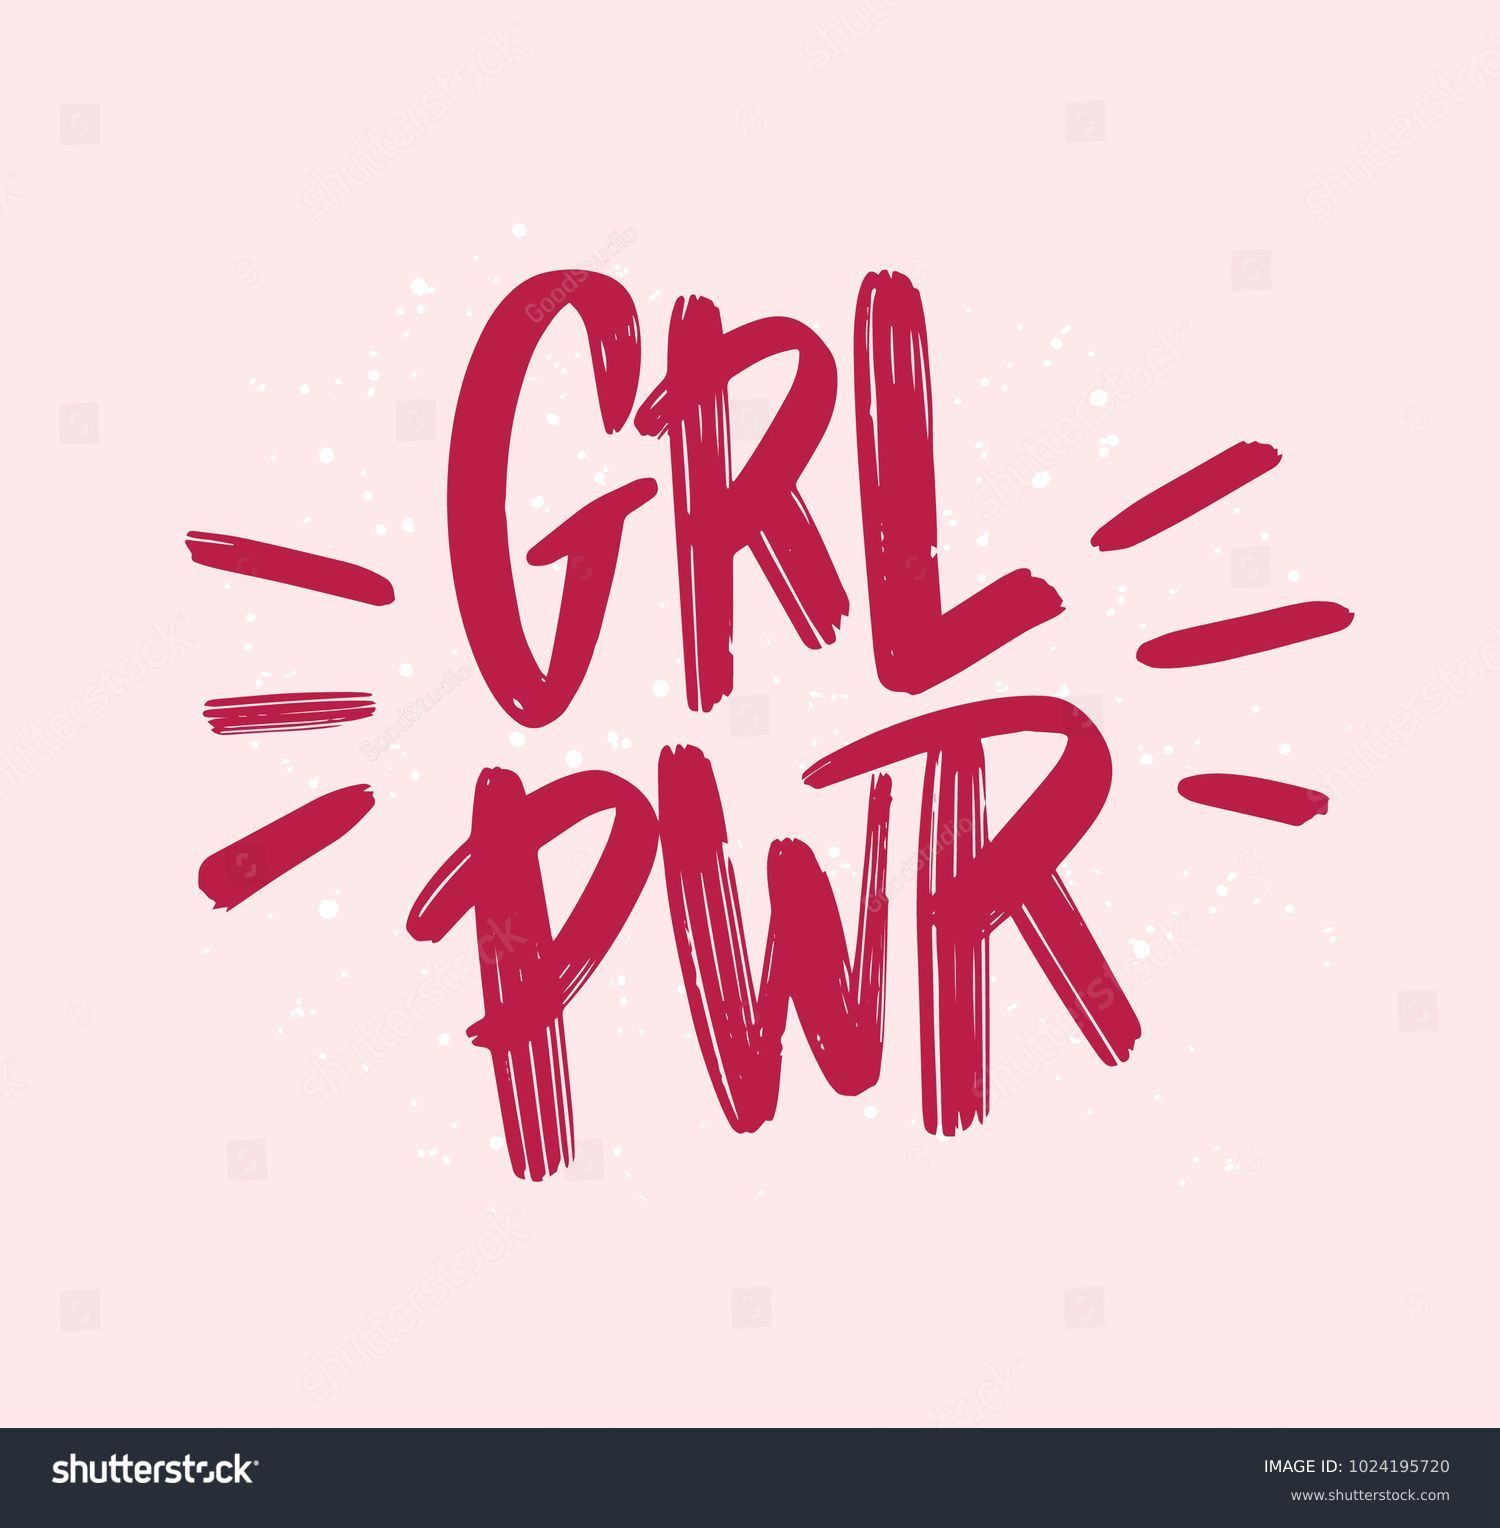 Girl power inscription handwritten with bright pink vivid font. GRL PWR hand lettering. Feminist slogan, phrase or quote. Modern vector illustration for t-shirt, sweatshirt or other apparel print. #1024195720